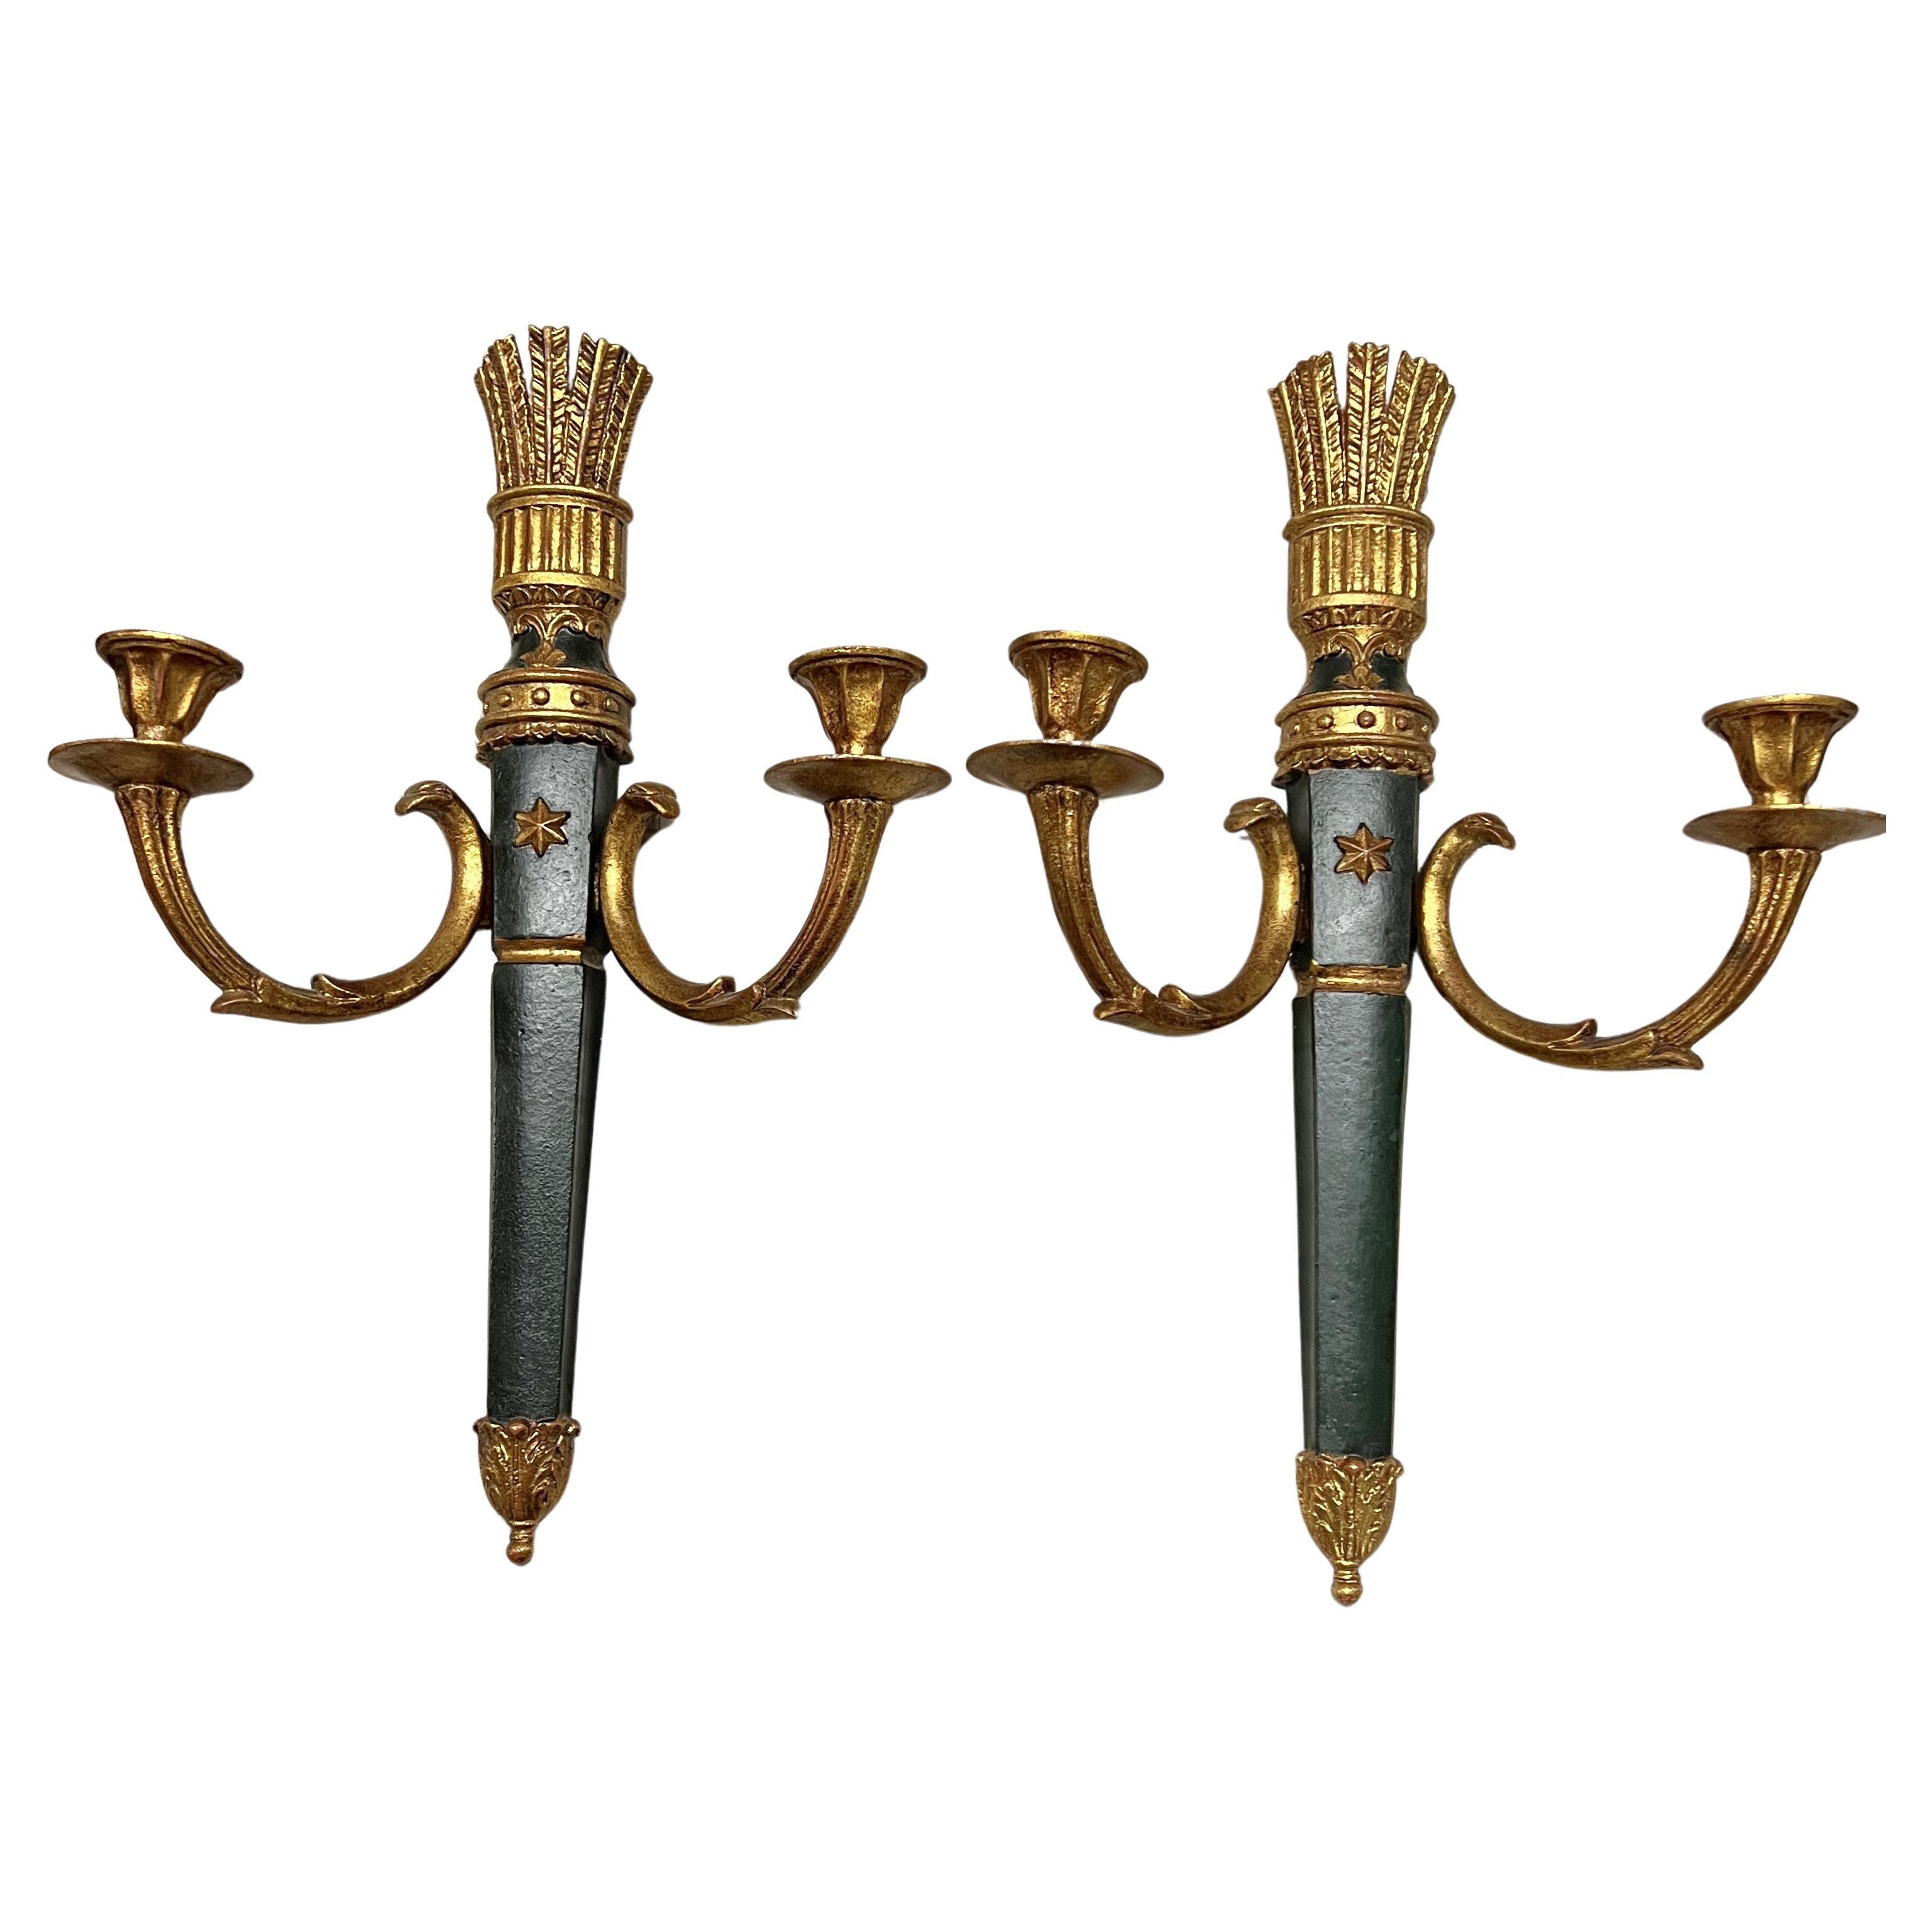 Pair of Neoclassical Quiver Themed Gilt Wall Sconces by Palladio